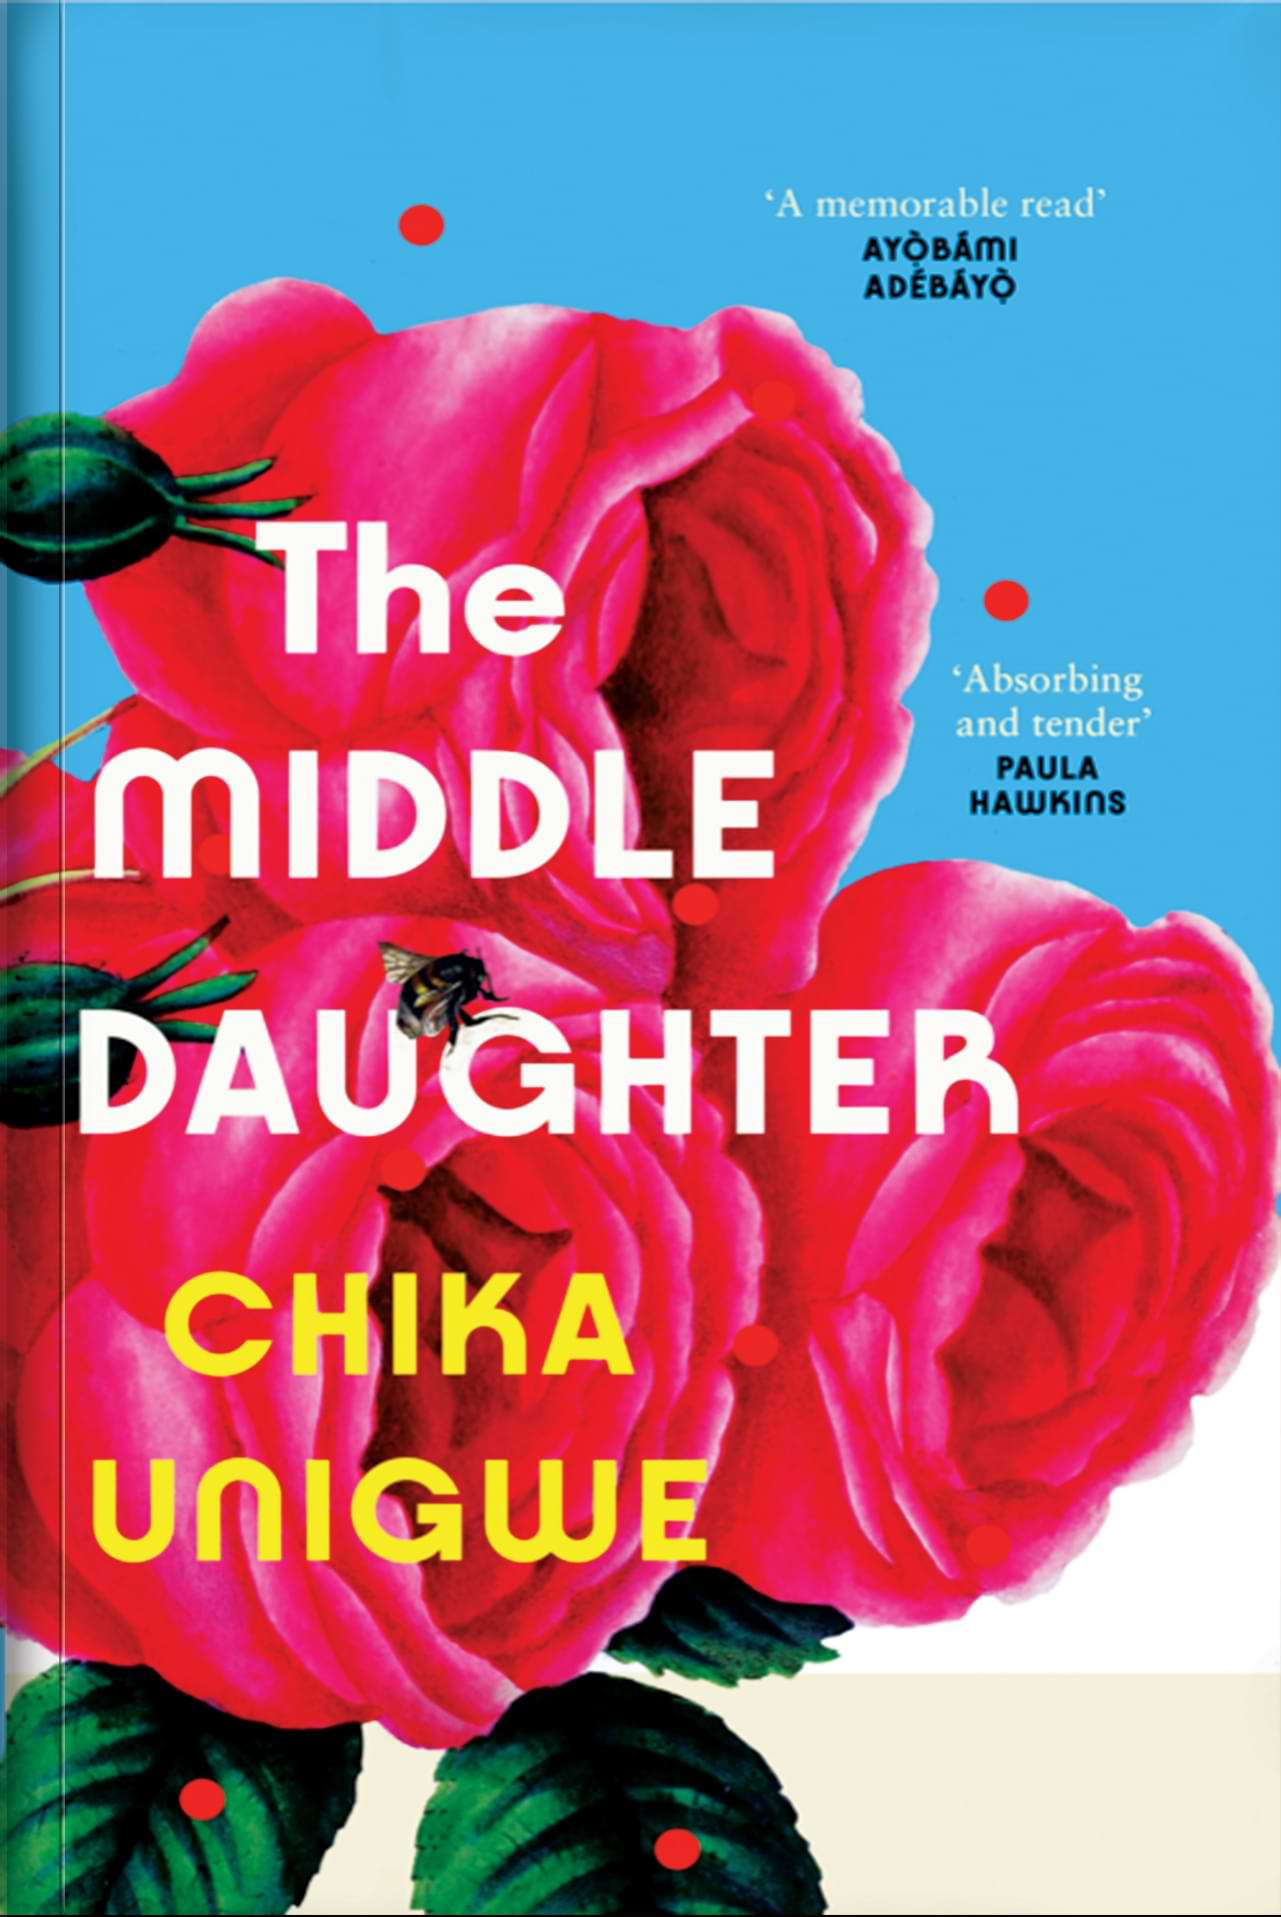 THE MIDDLE DAUGHTER